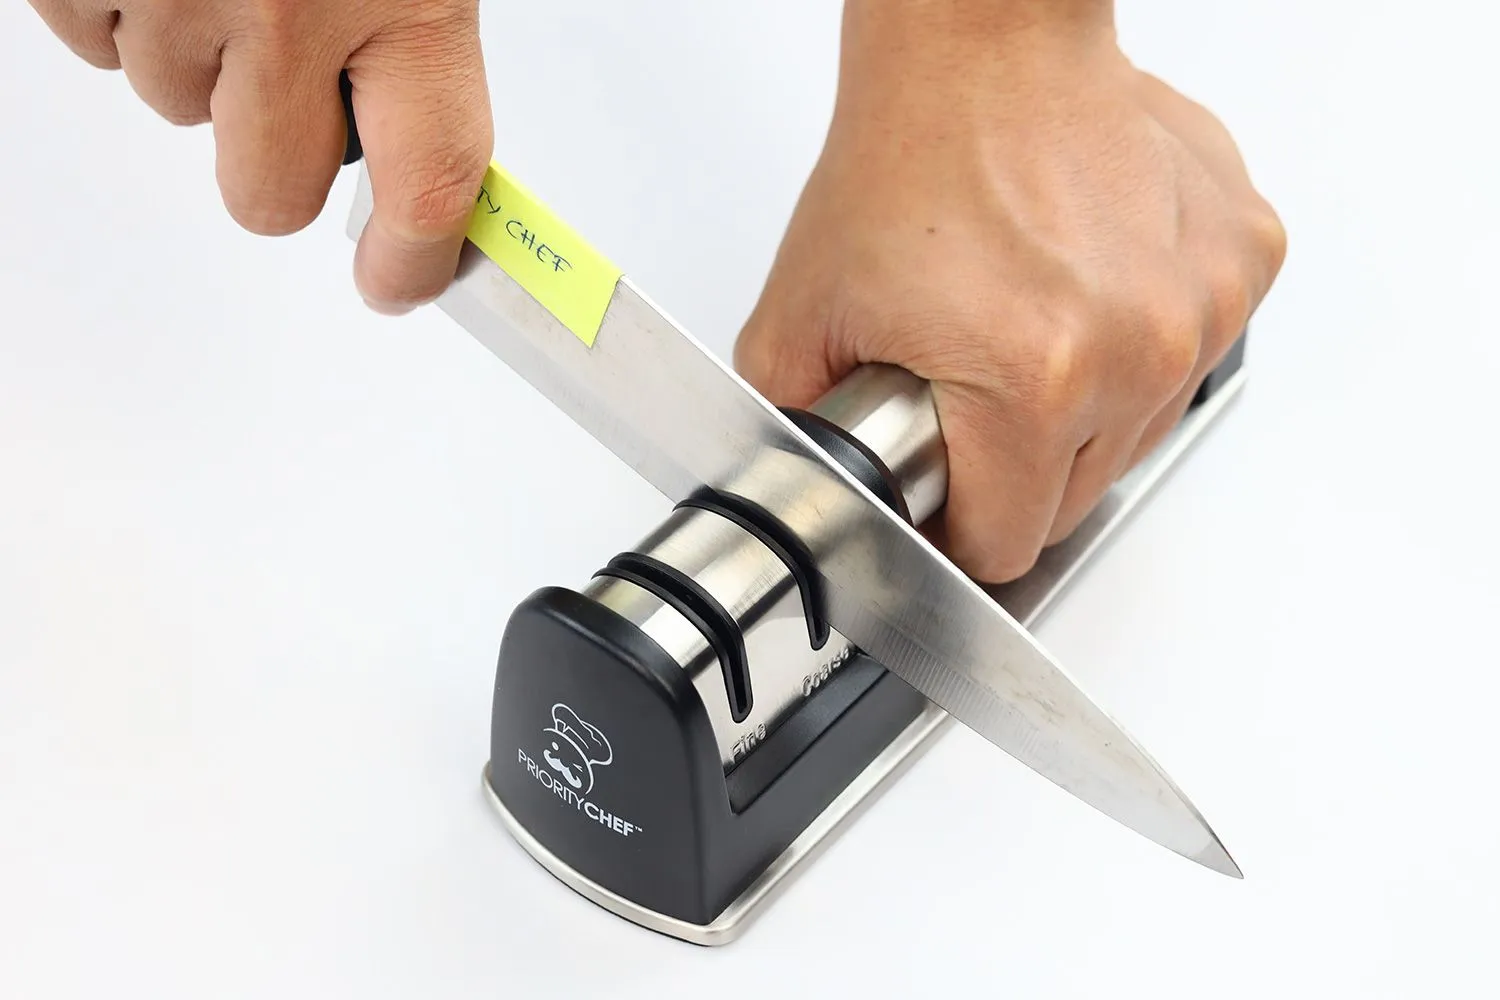 PriorityChef Knife Sharpener Is No Frills and Functional